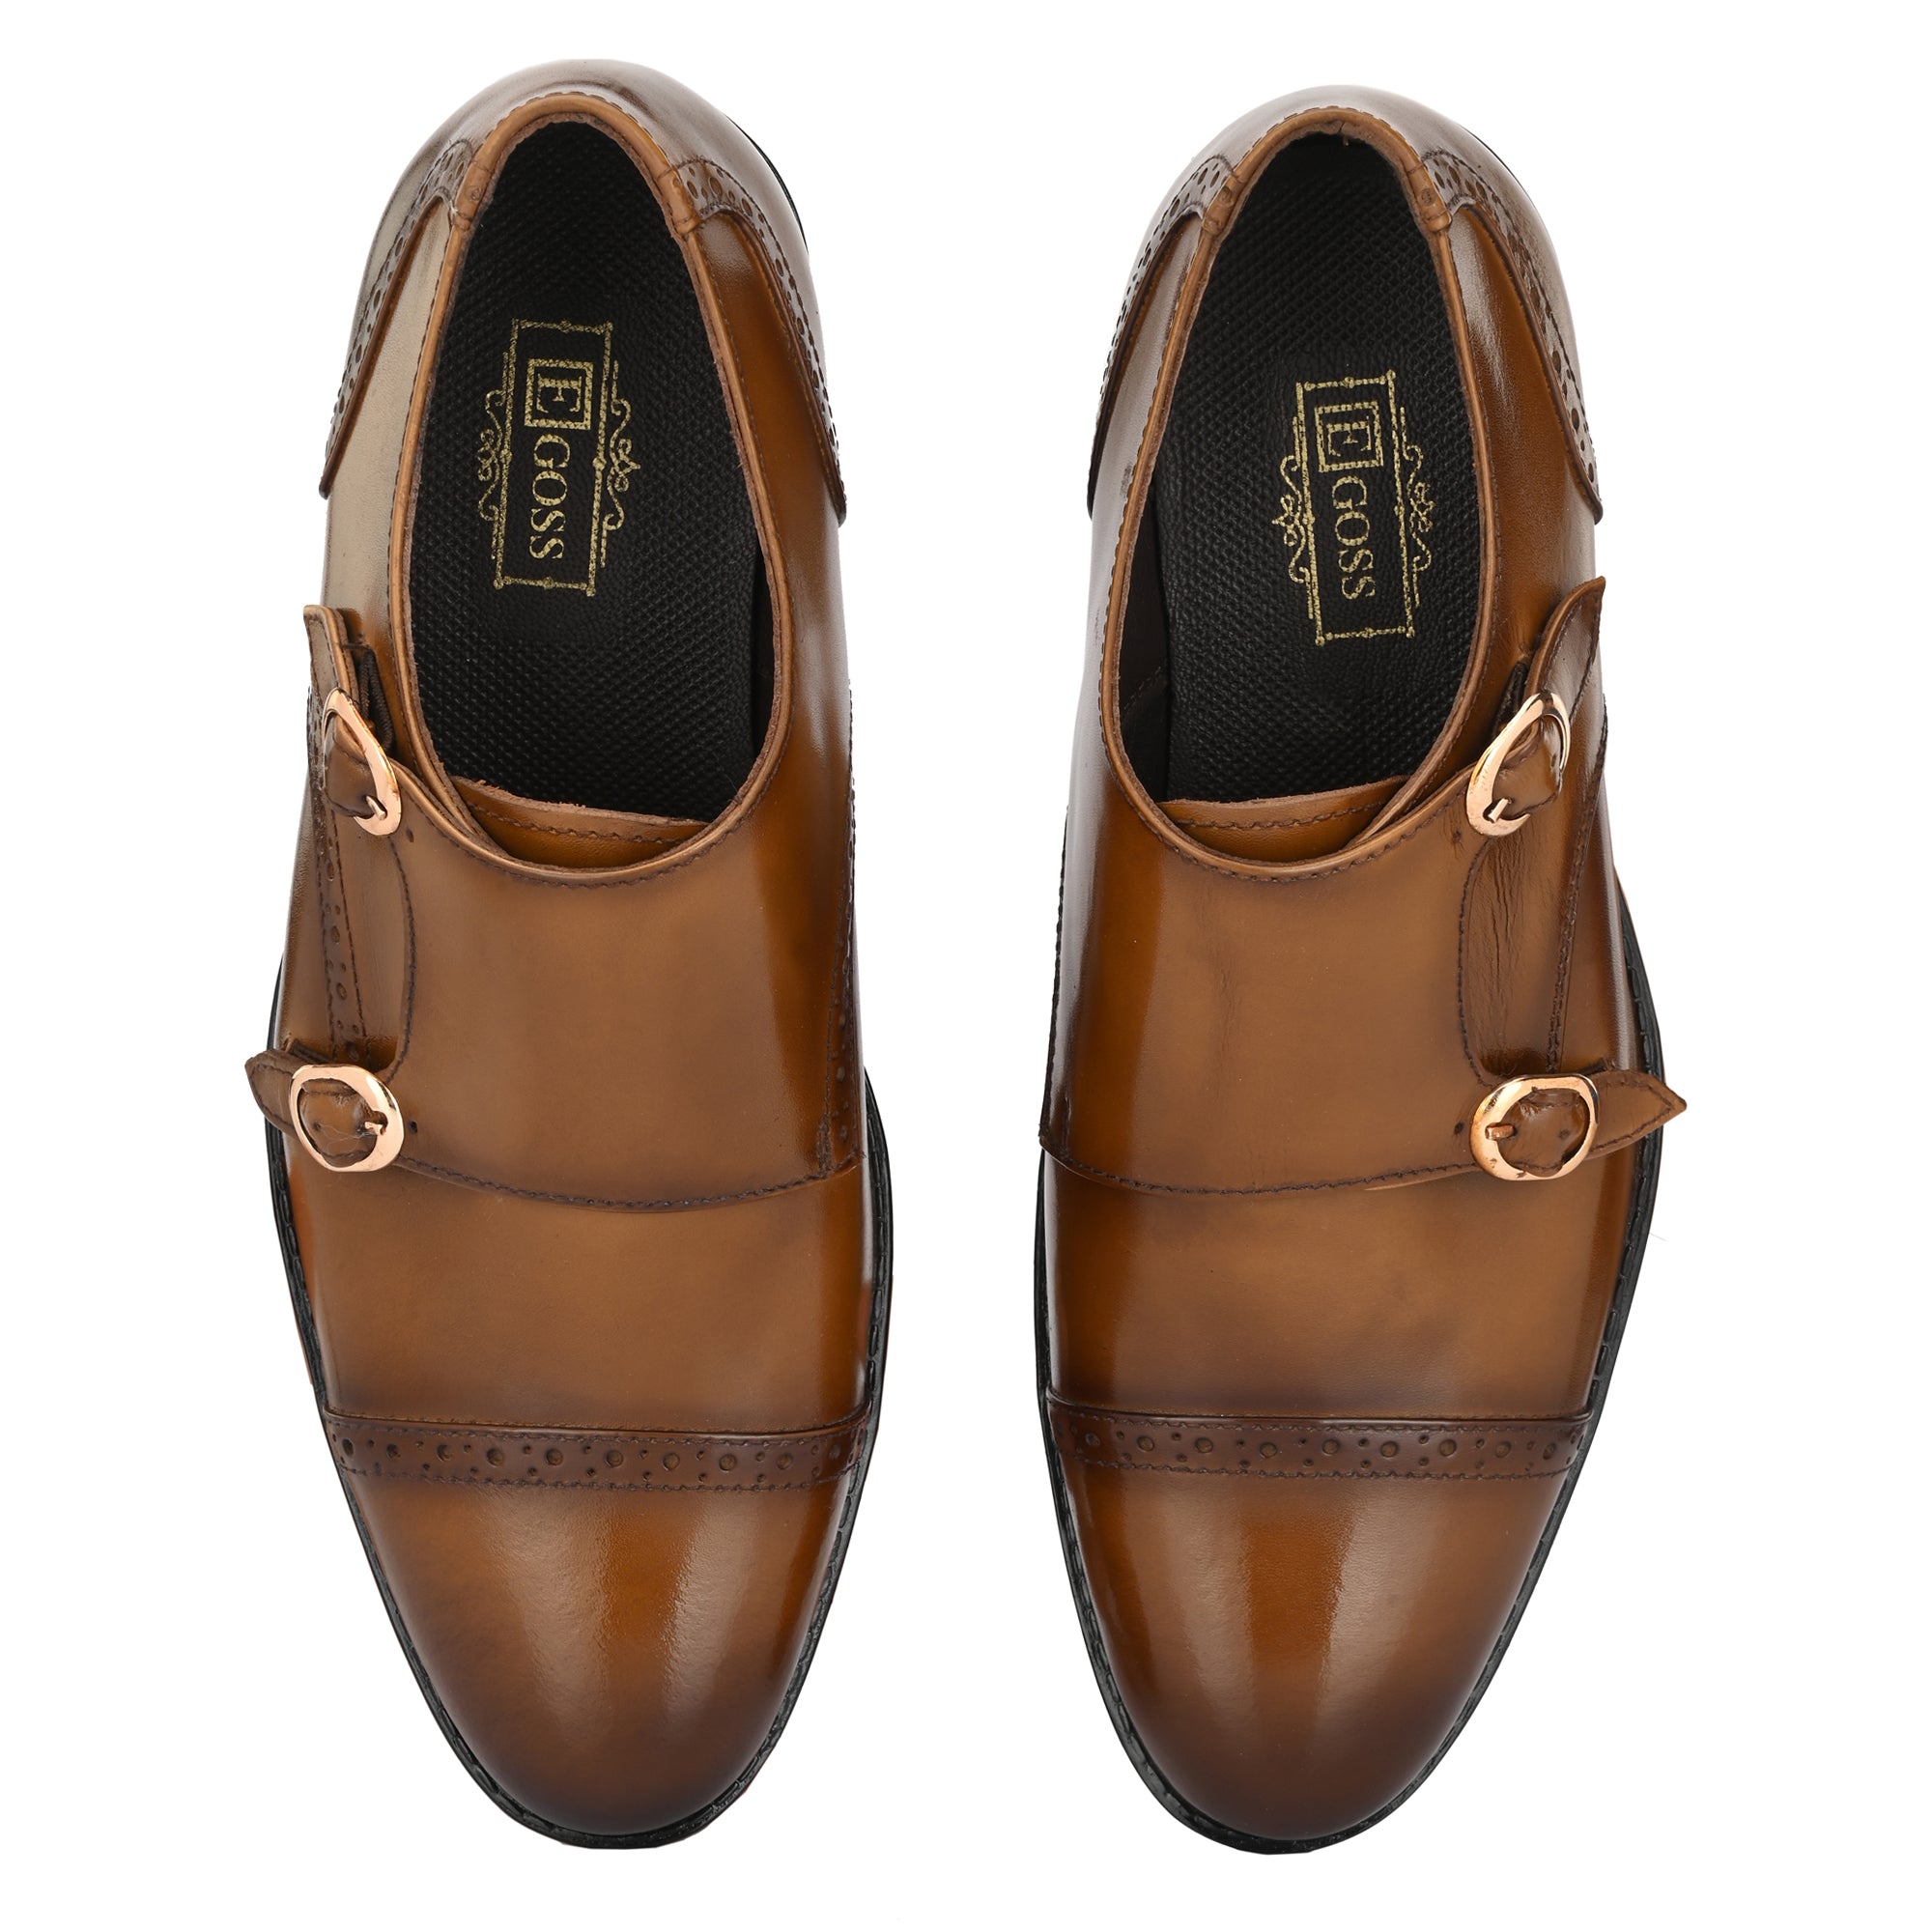 Formal Leather Buckled Monk Shoes For Men